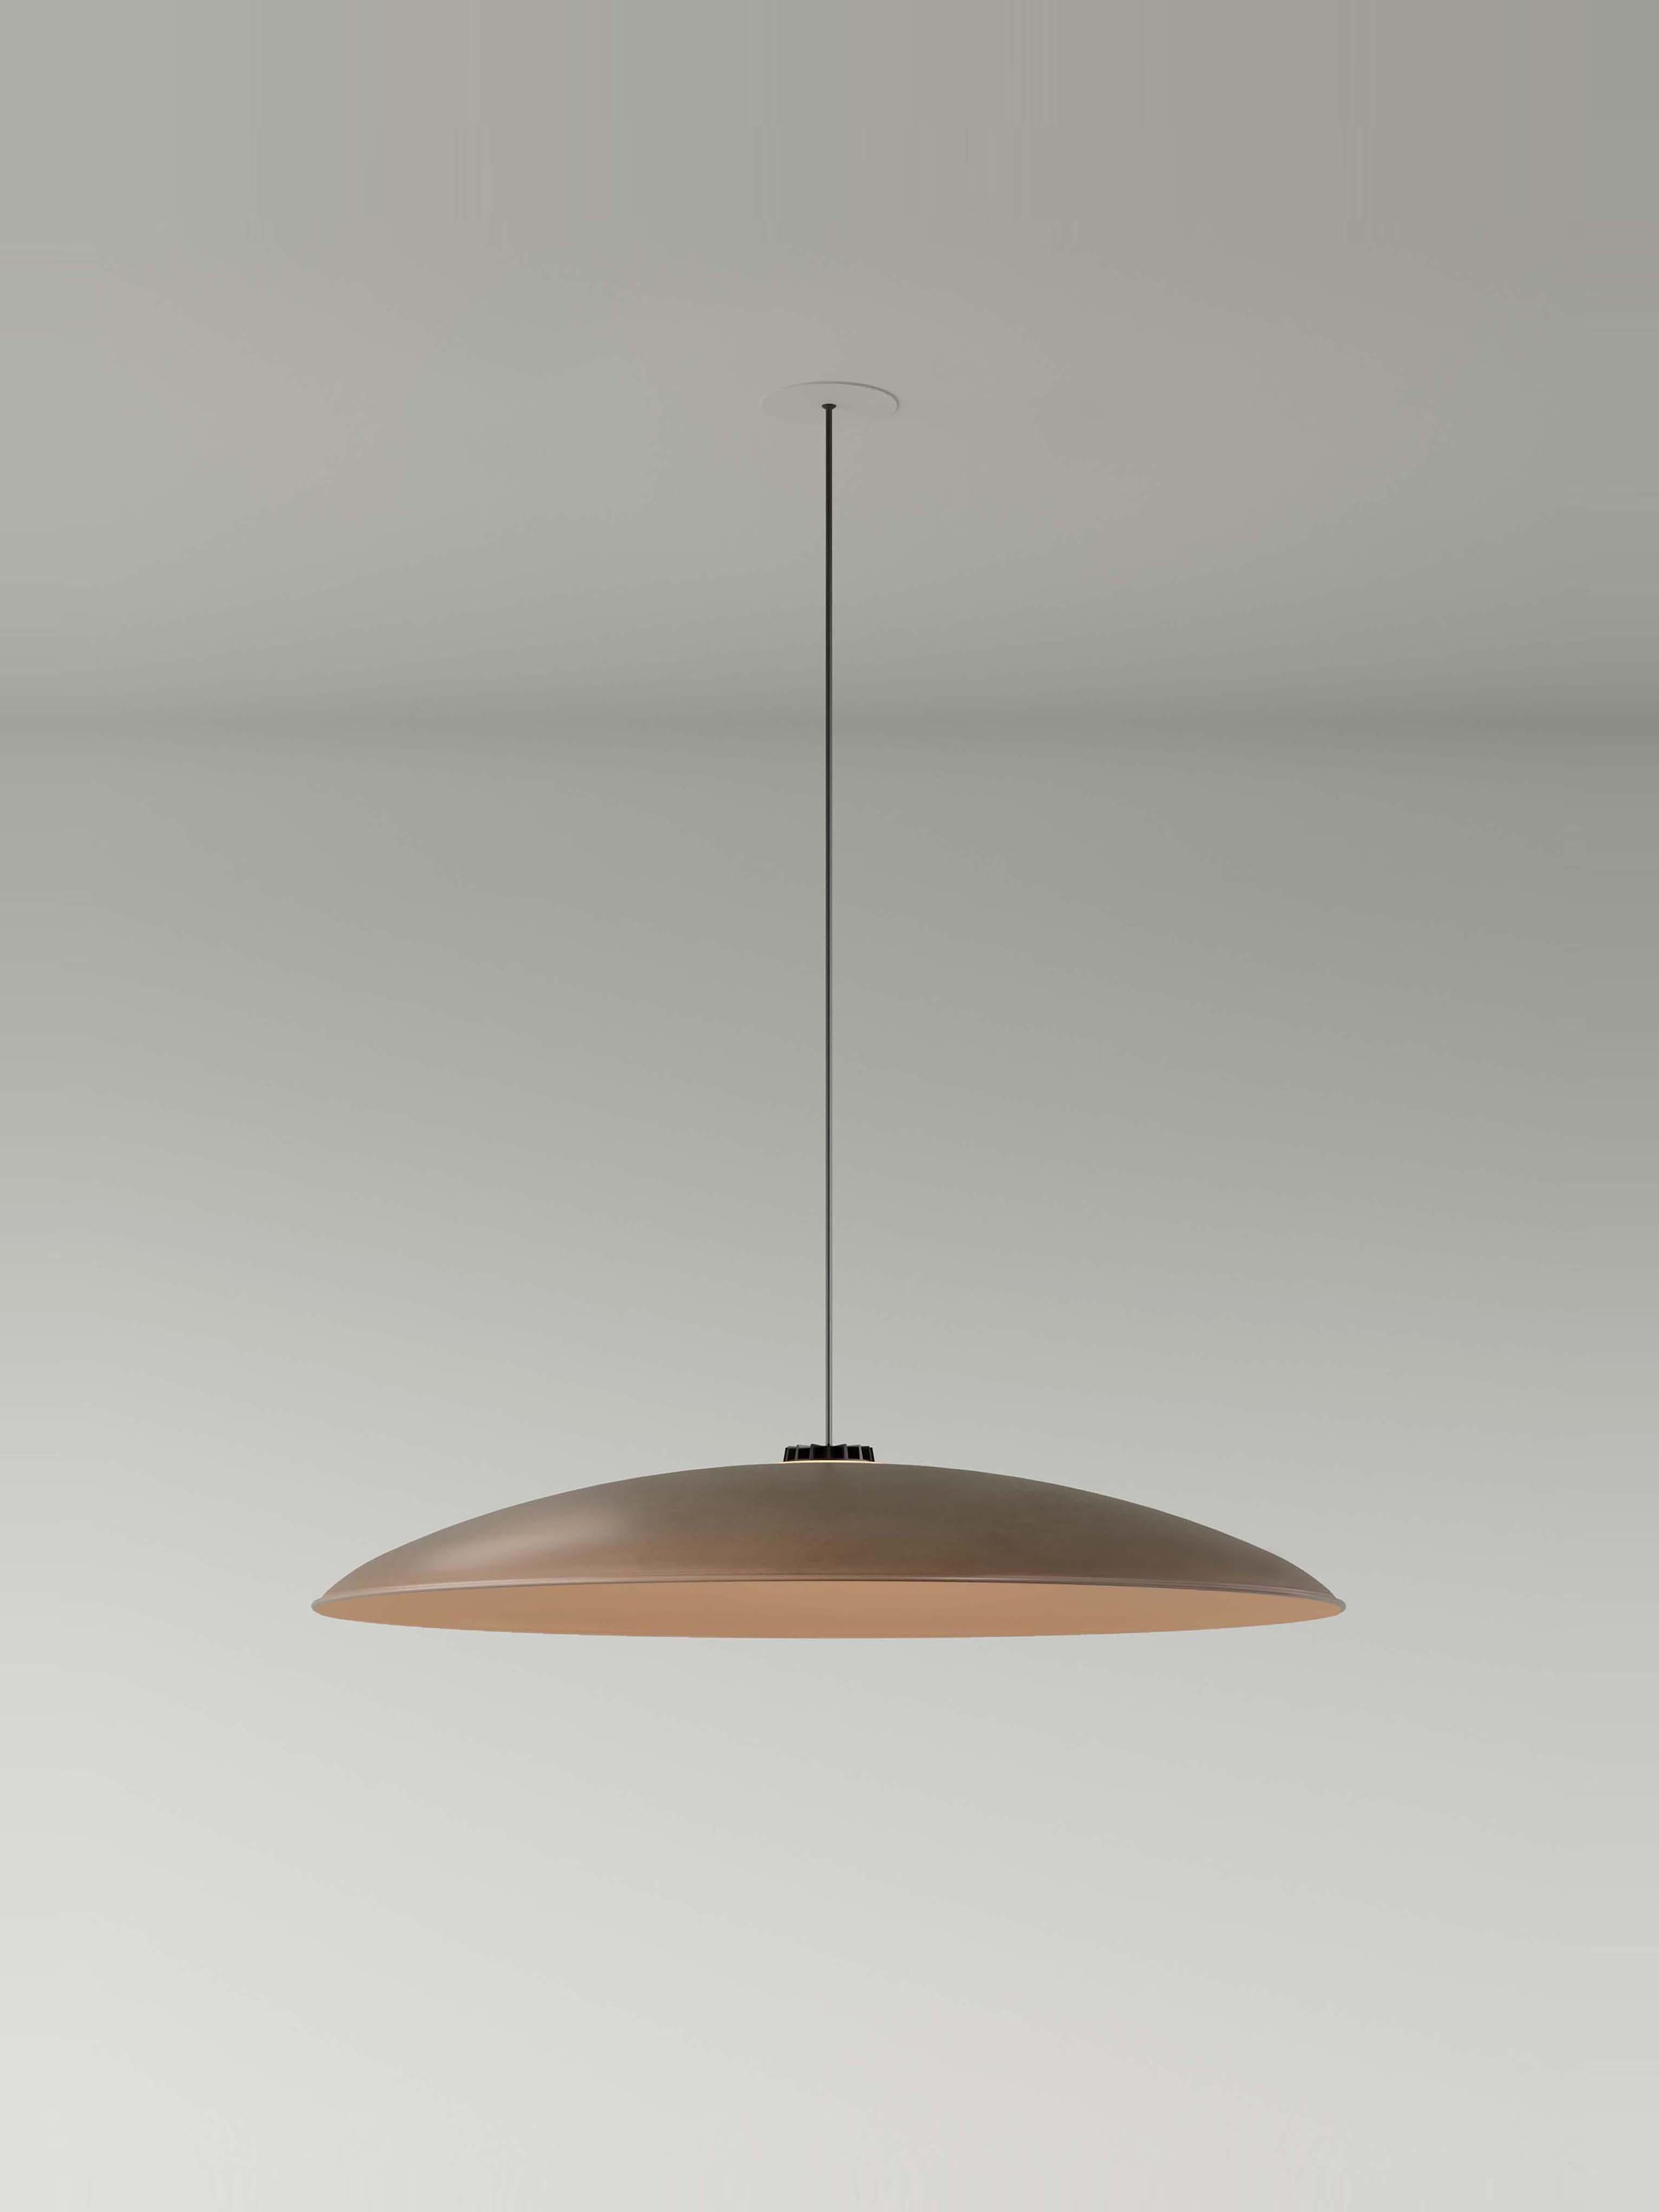 Large brown headhat plate pendant lamp by Santa & Cole
Dimensions: D 75 x H 11 cm
Materials: Metal.
Cable lenght: 3mts.
Available in other colors and sizes. Available in 2 cable lengths: 3mts, 8mts.
Availalble in 2 canopy colors: Black or